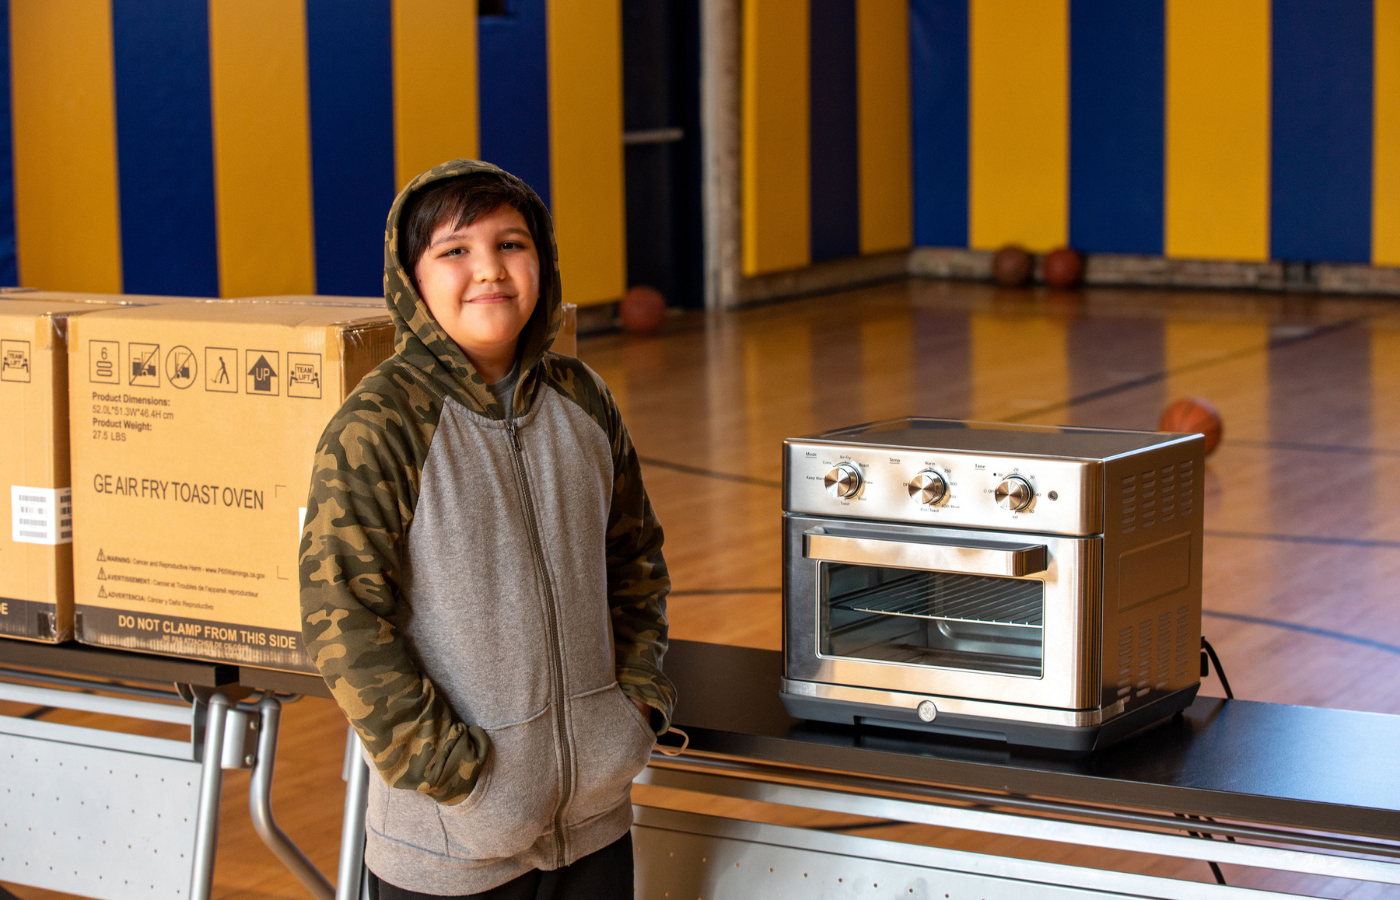 Young boy poses for a photo with his new toaster oven.